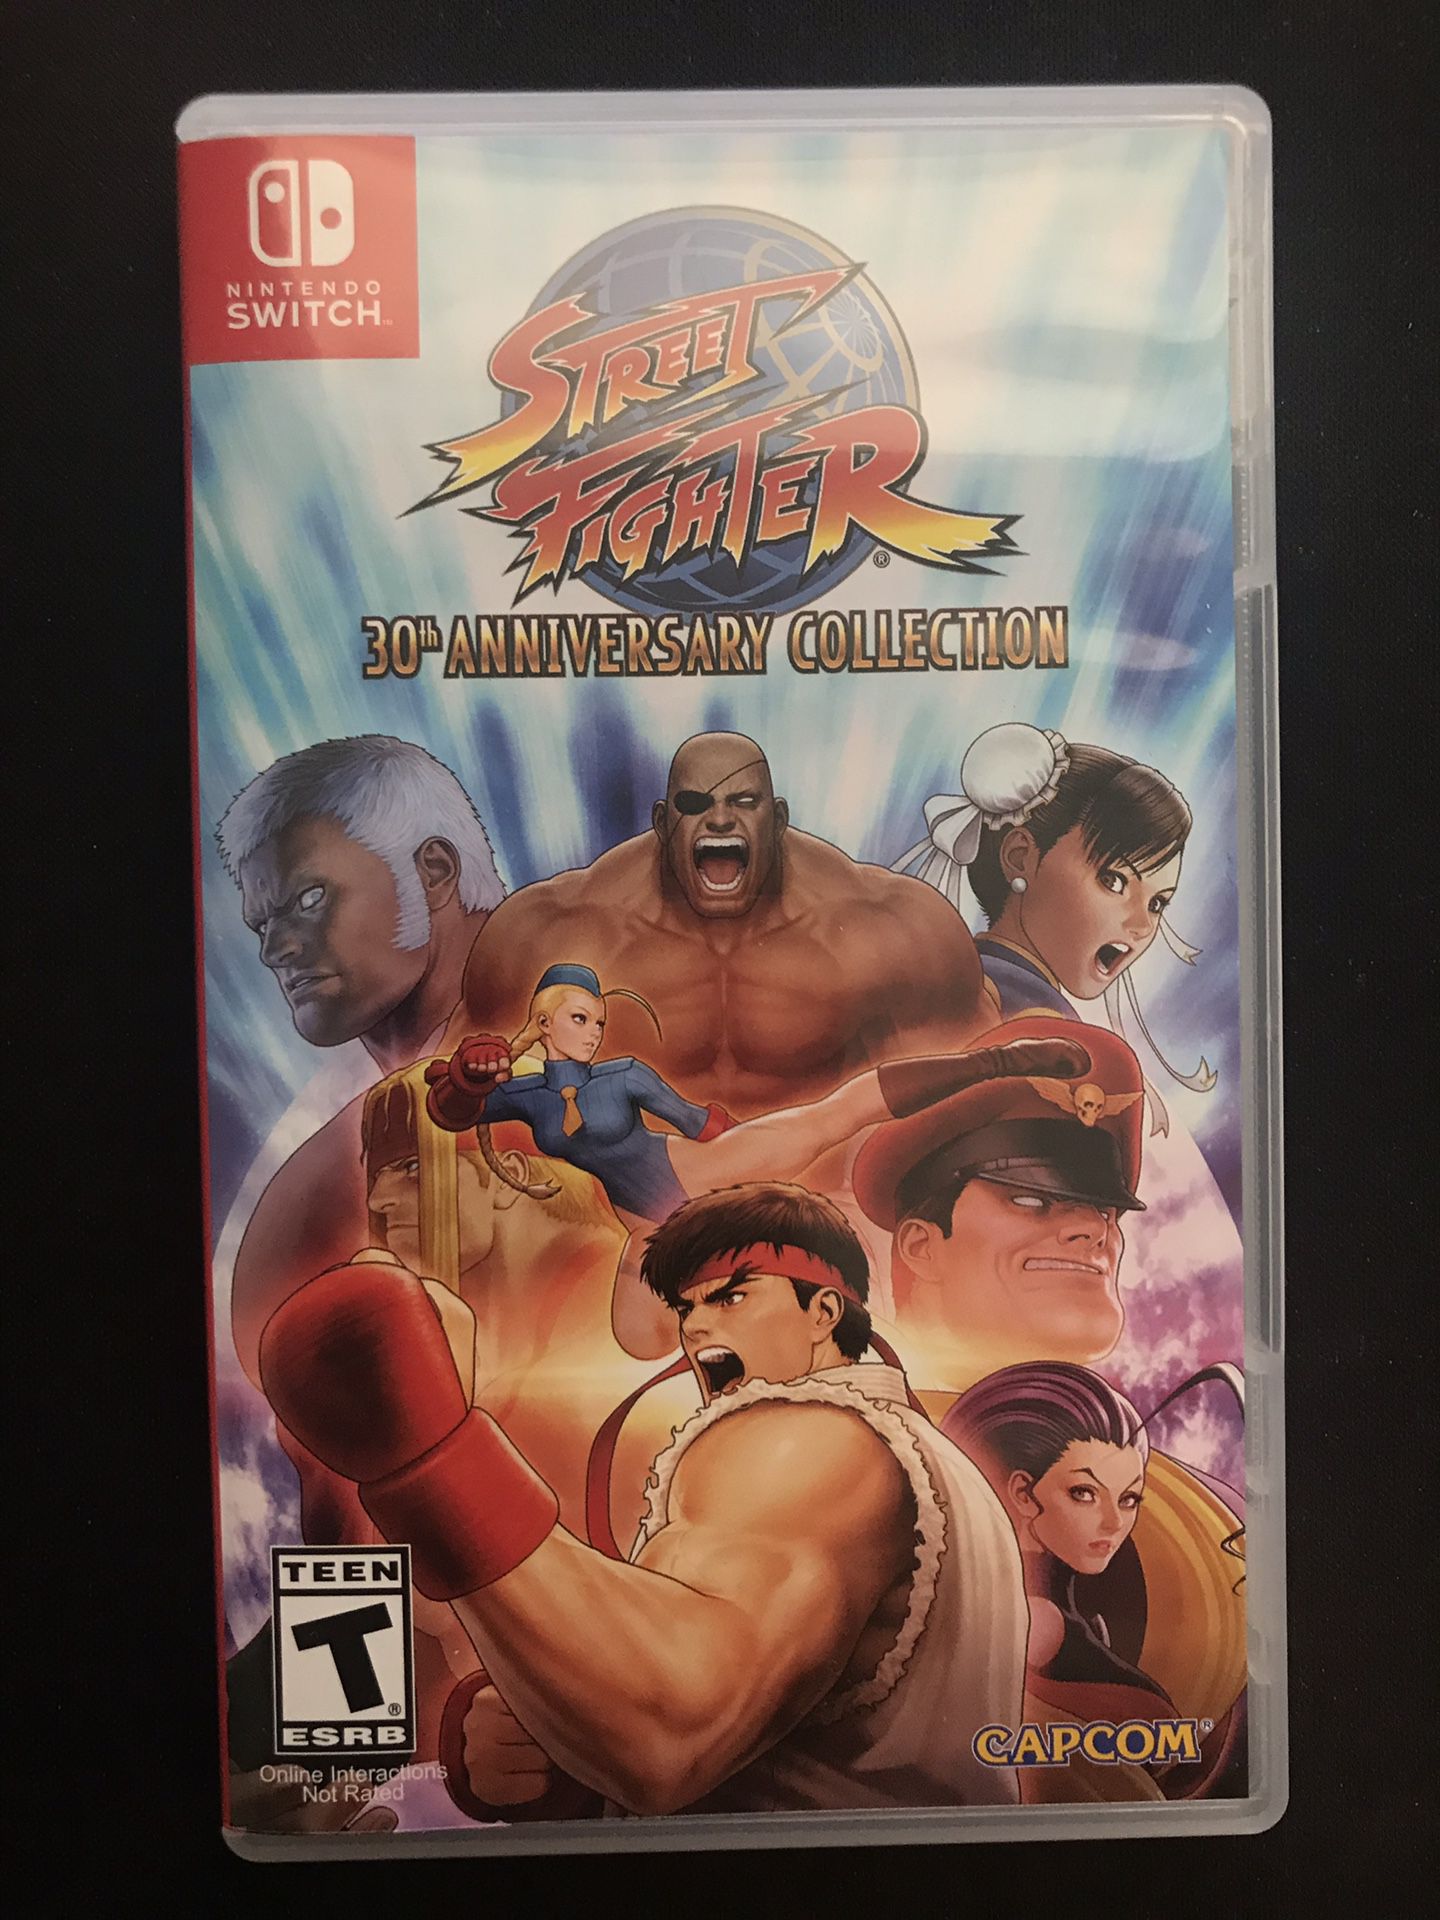 Street Fighter 30th Anniversary collection